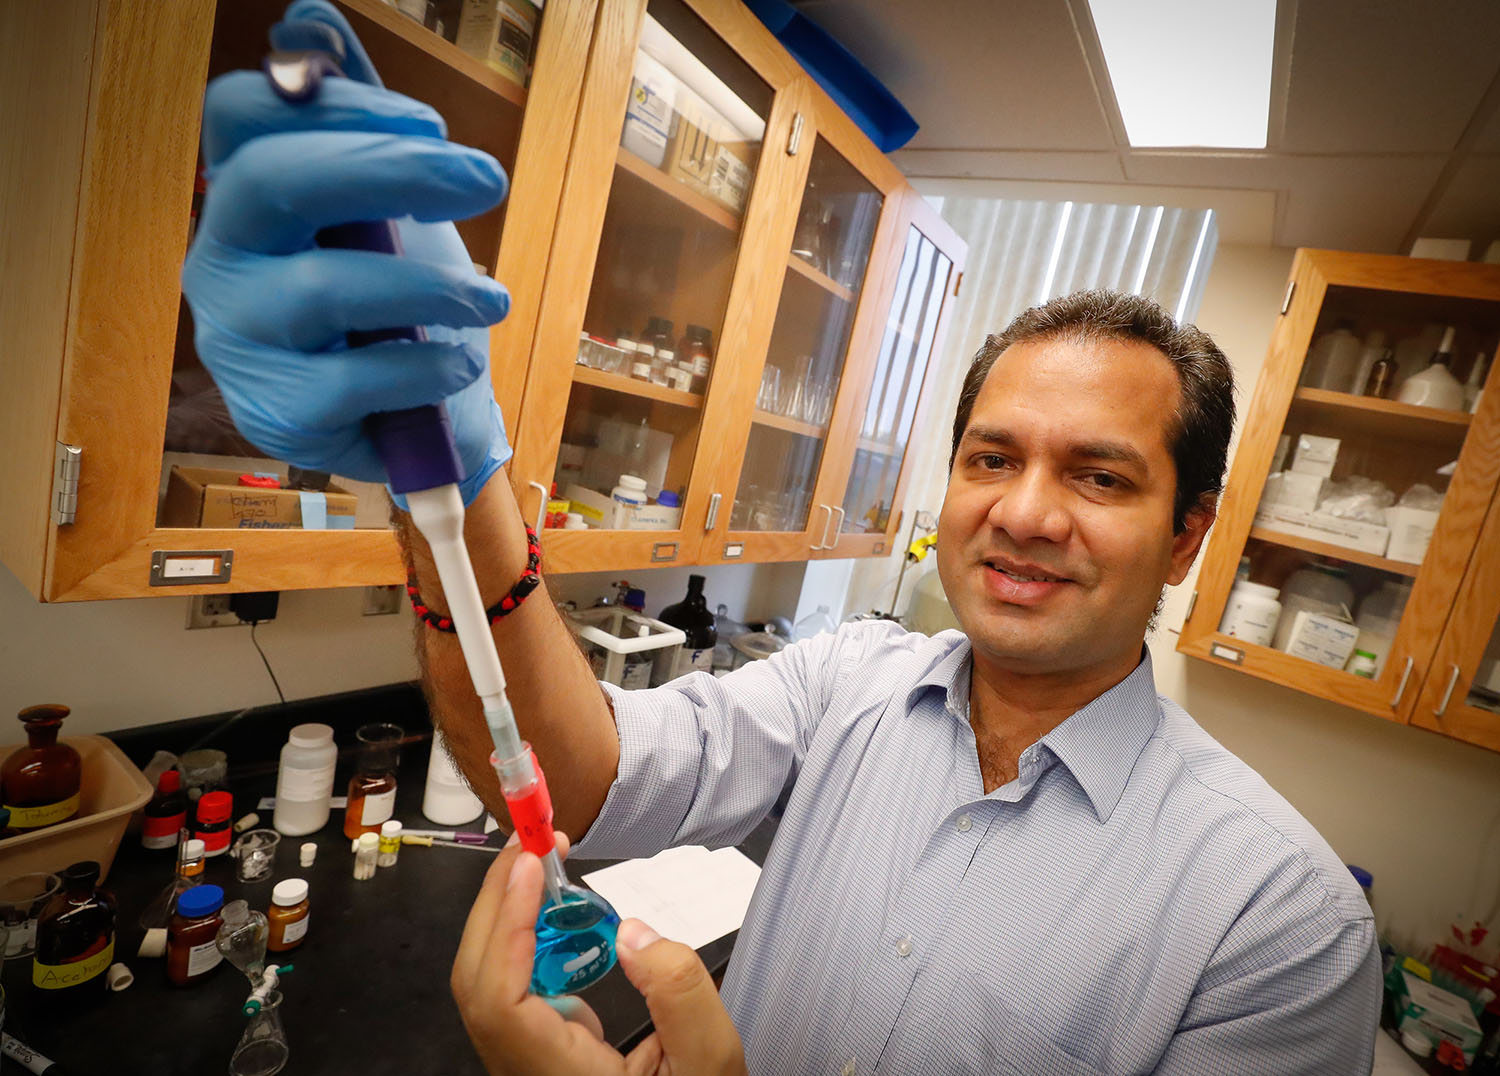 UNK associate chemistry professor Mahesh Pattabiraman is researching photoactive dyes that generate disinfecting molecules when they’re exposed to light. The goal is to develop an effective and safe disinfectant for prosthetic limbs. (Photo by Corbey R. Dorsey, UNK Communications)